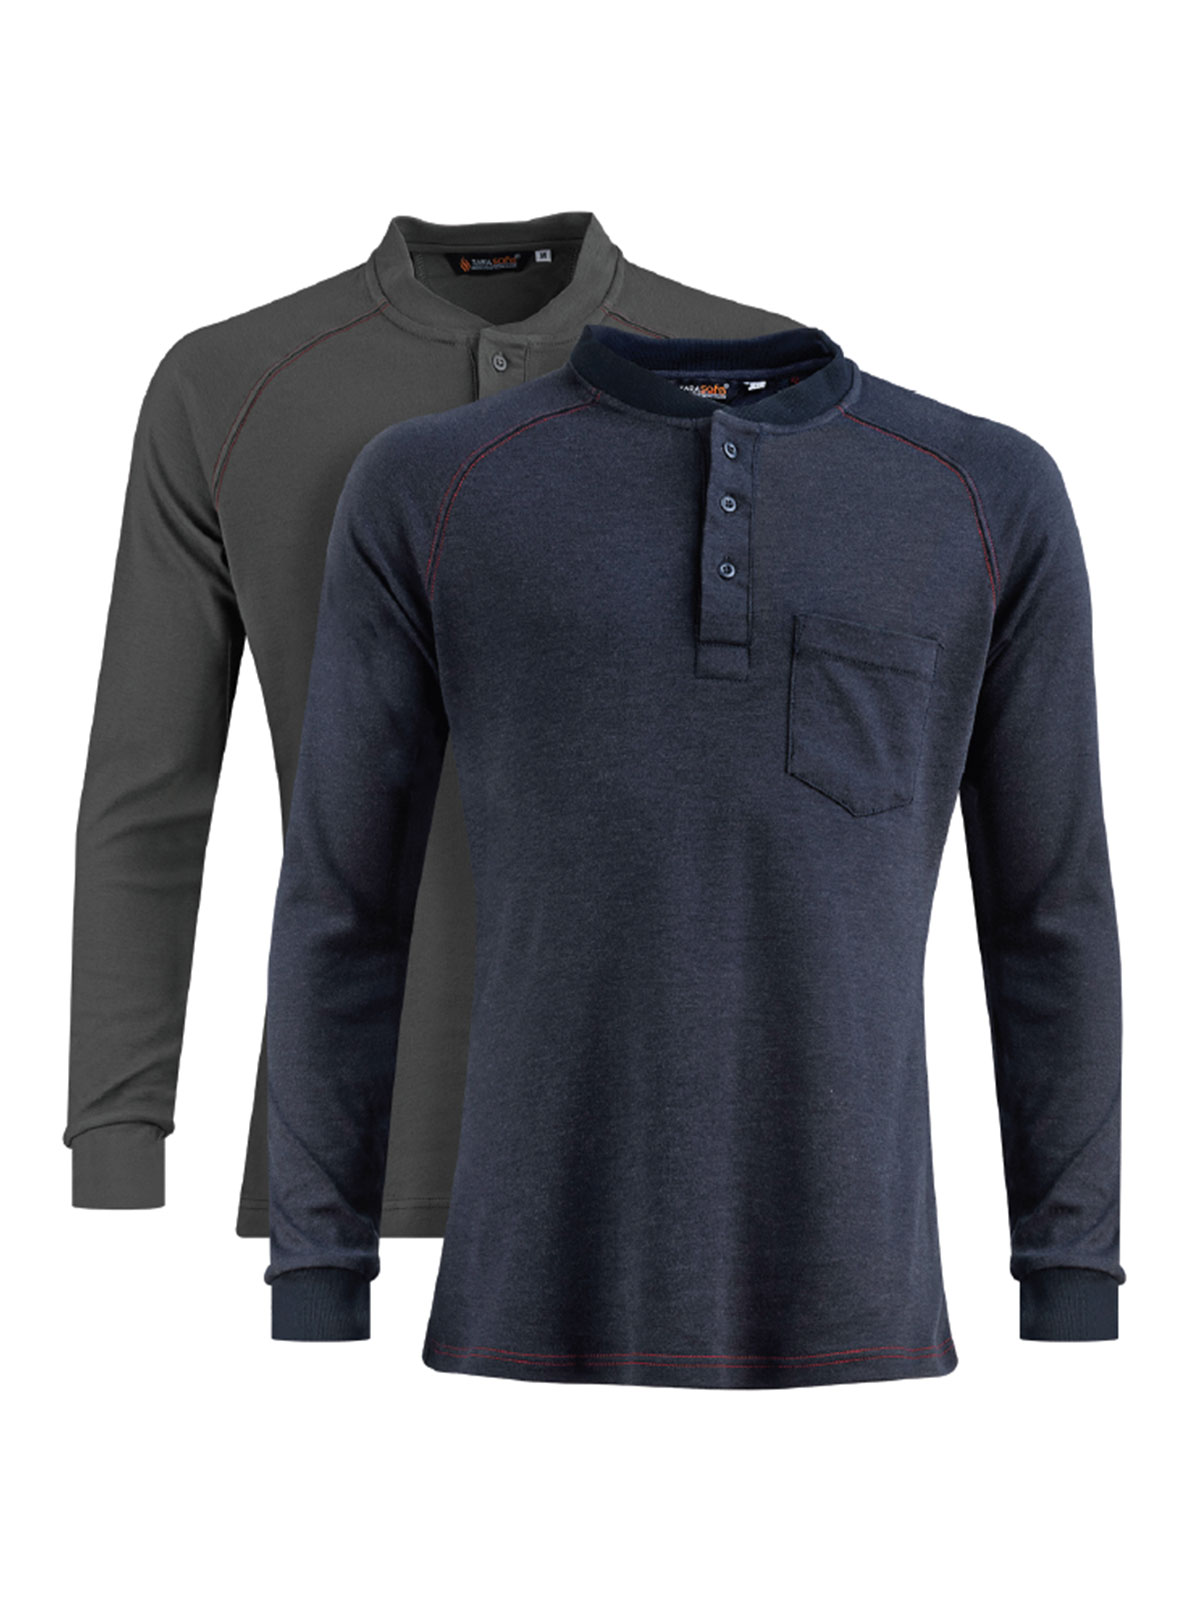 FR T-Shirts | Best Casual Workwear Flame Resistant T-Shirts | Tarasafe